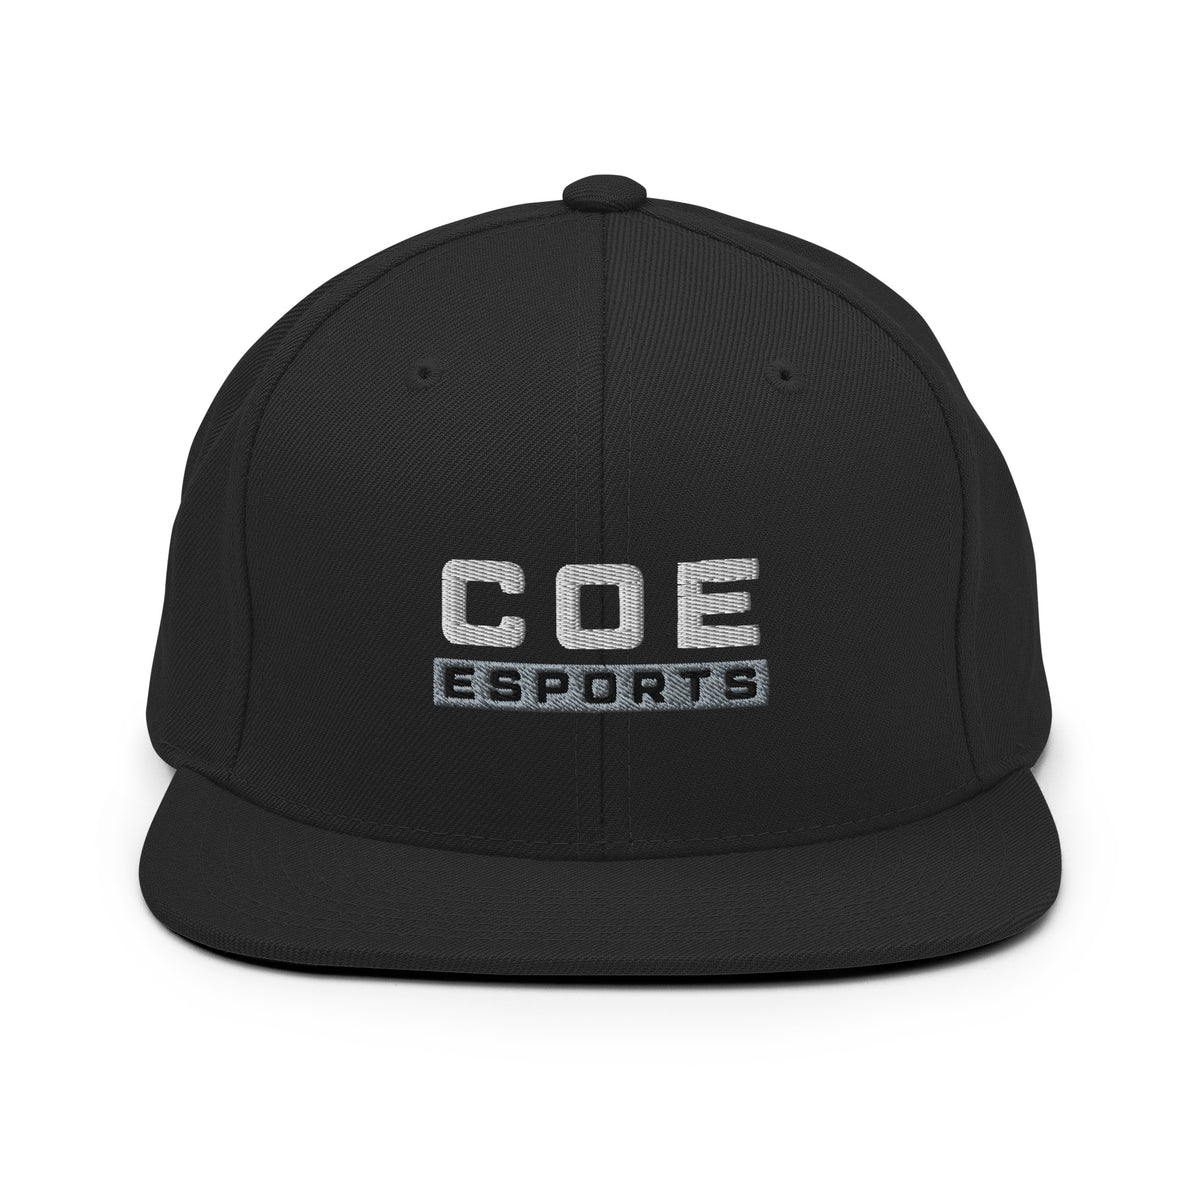 Coe College | On Demand | Embroidered Snapback Hat